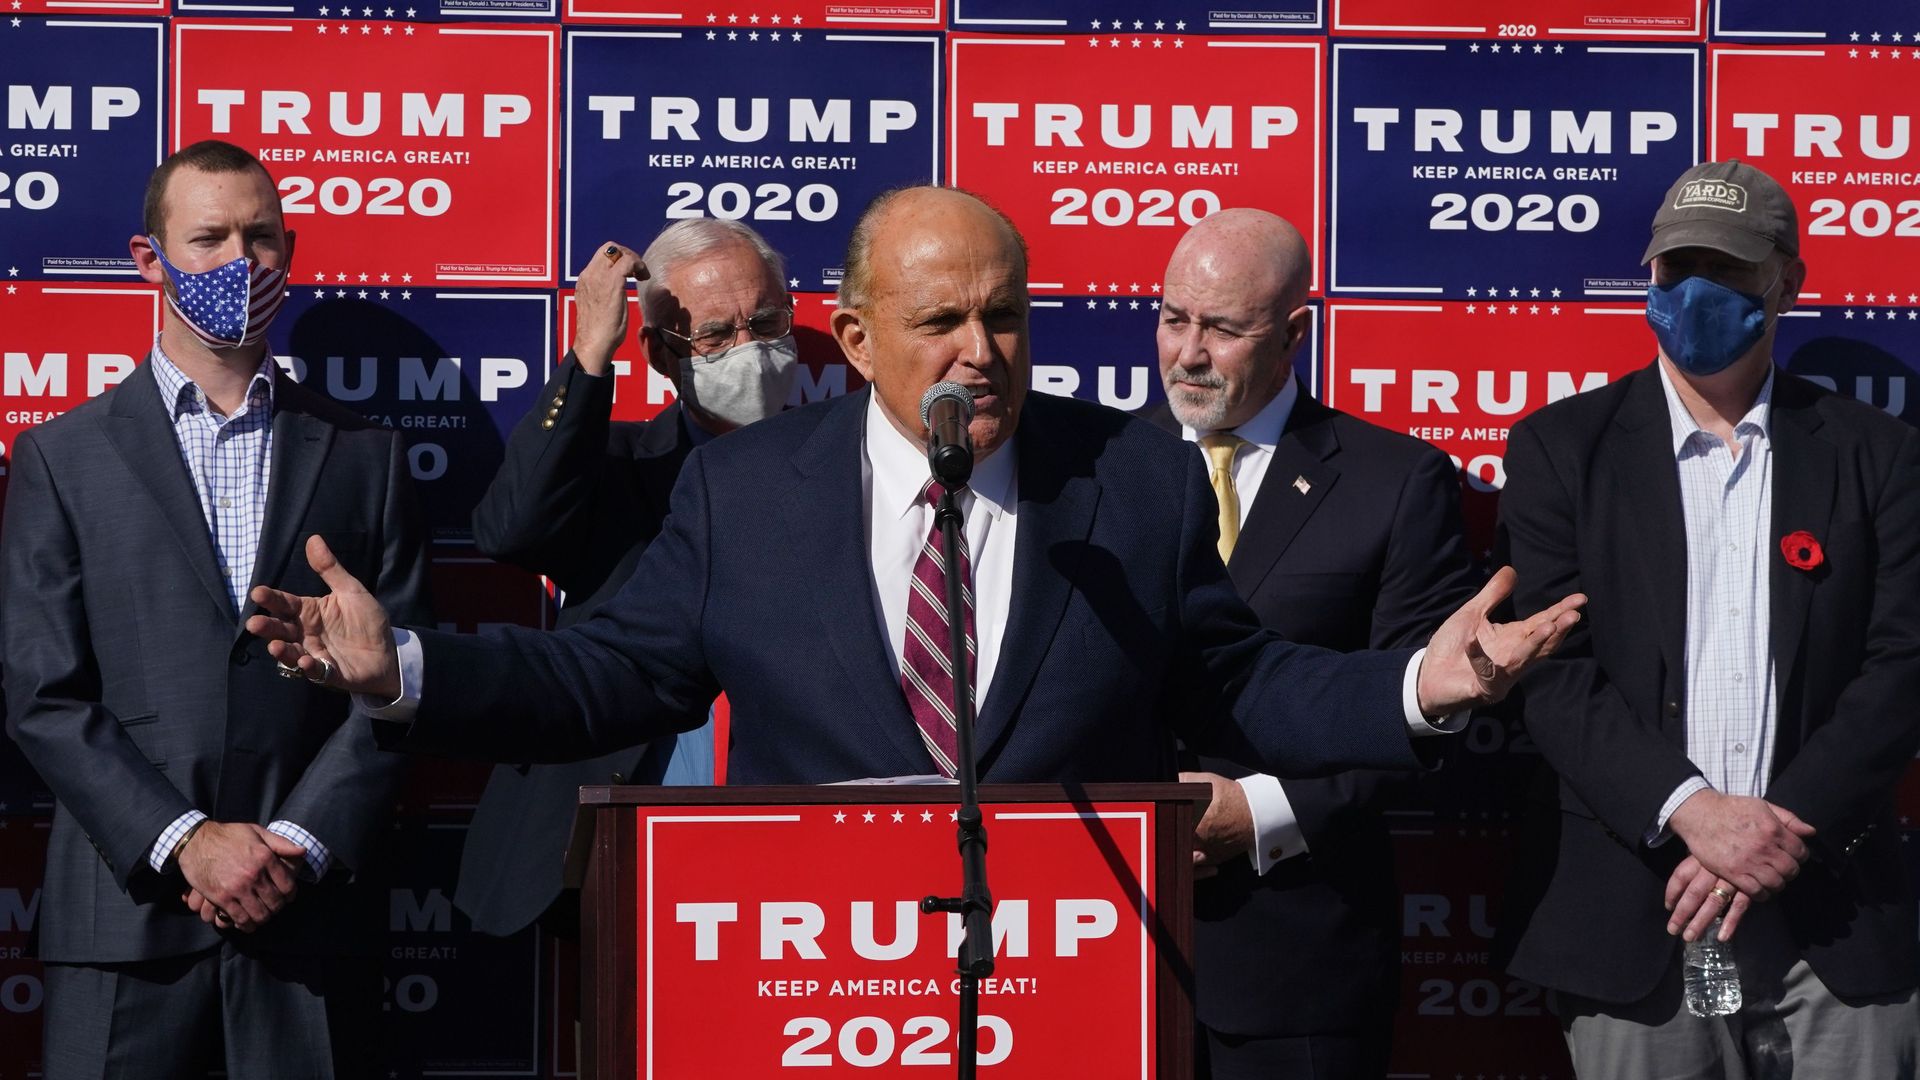 Photo of Rudy Giuliani speaking behind a podium at a Trump 2020 news conference 